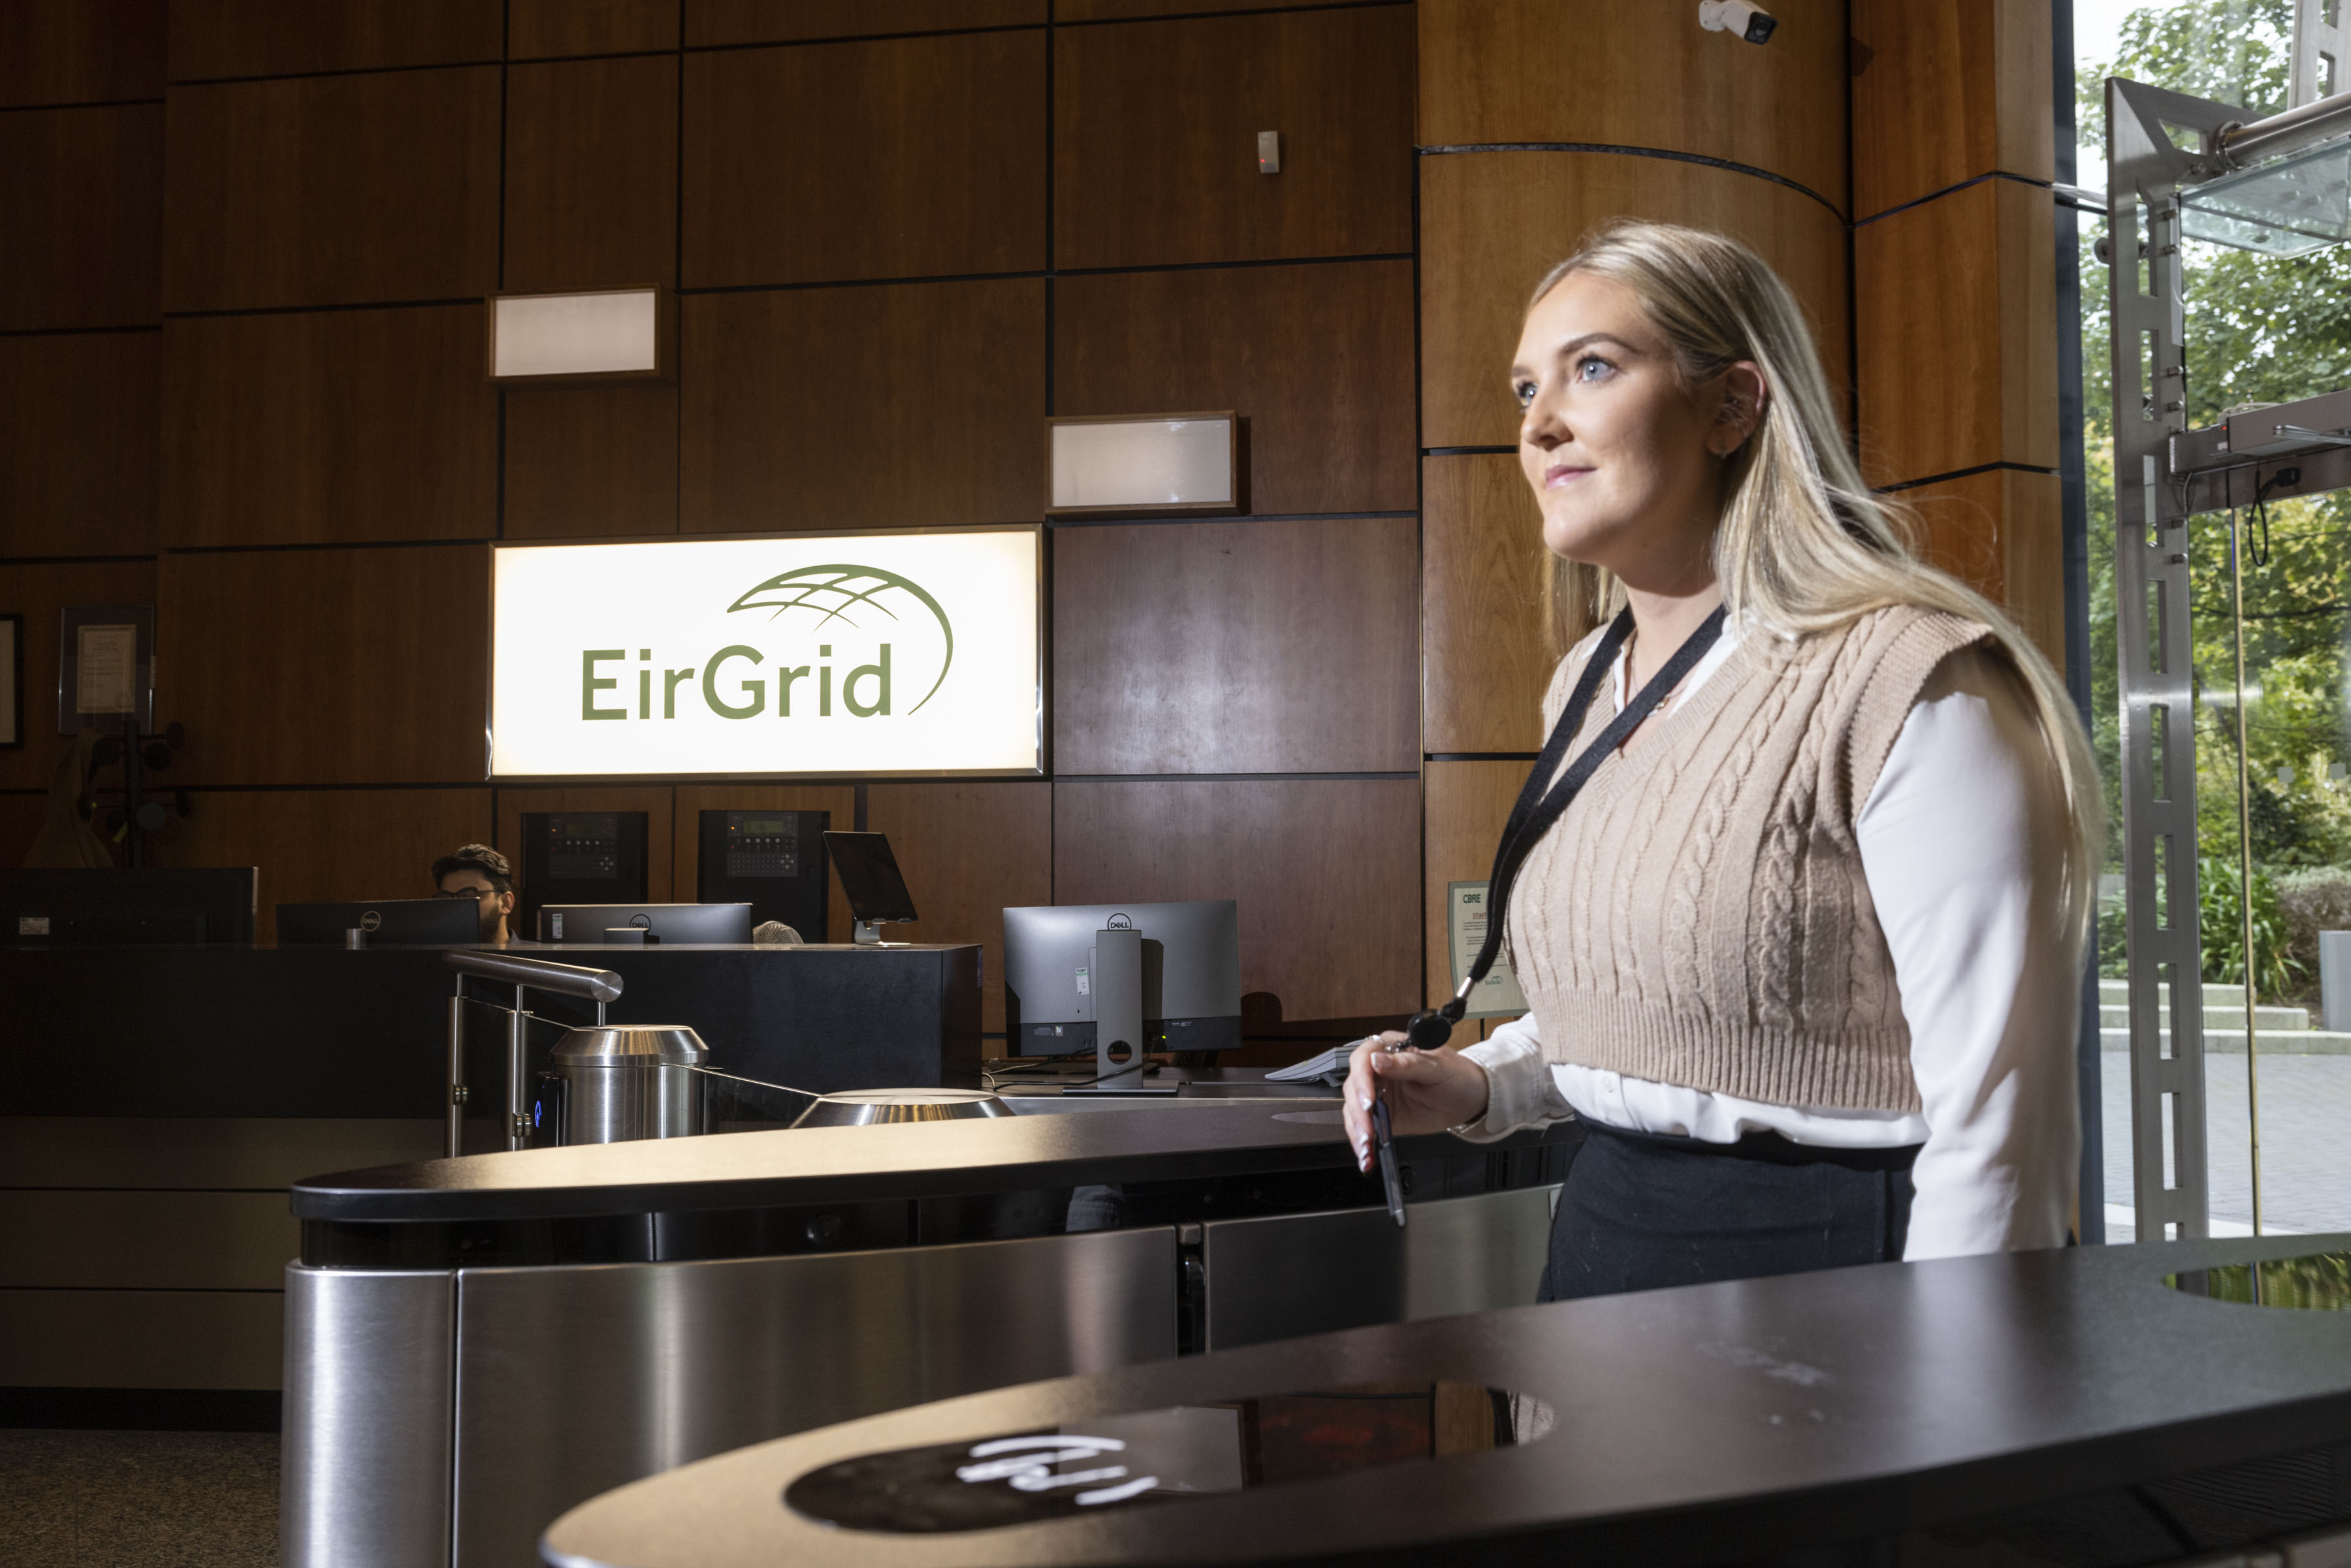 A graduate enters the EirGrid office at The Oval